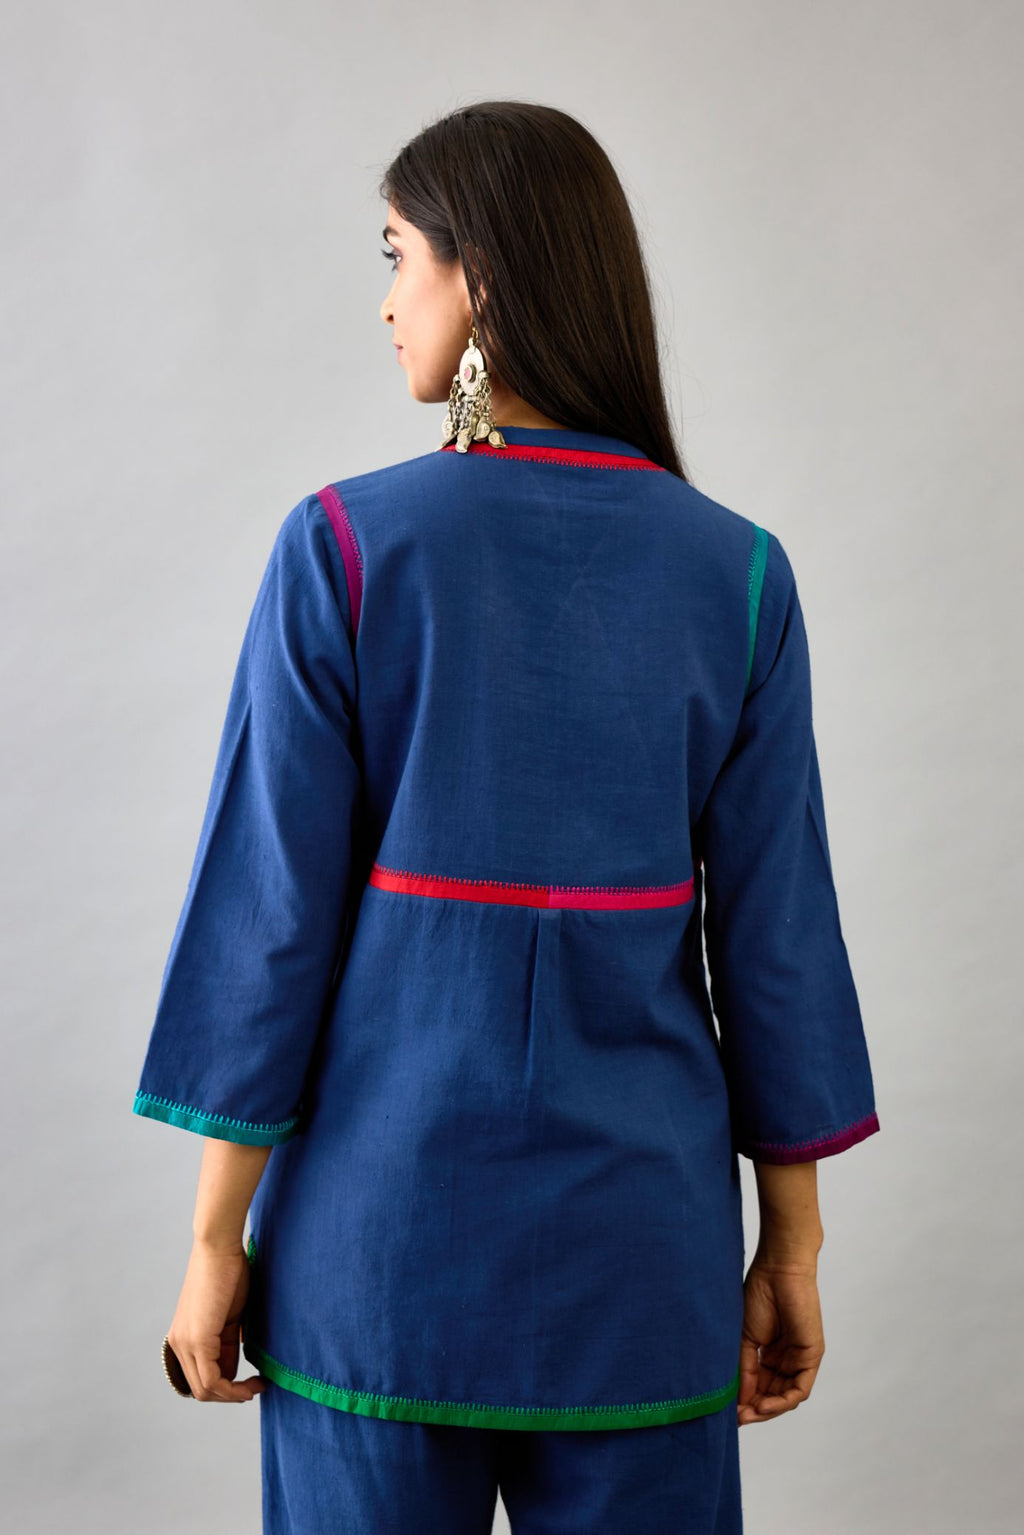 Blue handloom cotton short top with multi colored silk facings and embroidery detail, paired with blue handloom cotton straight pants.